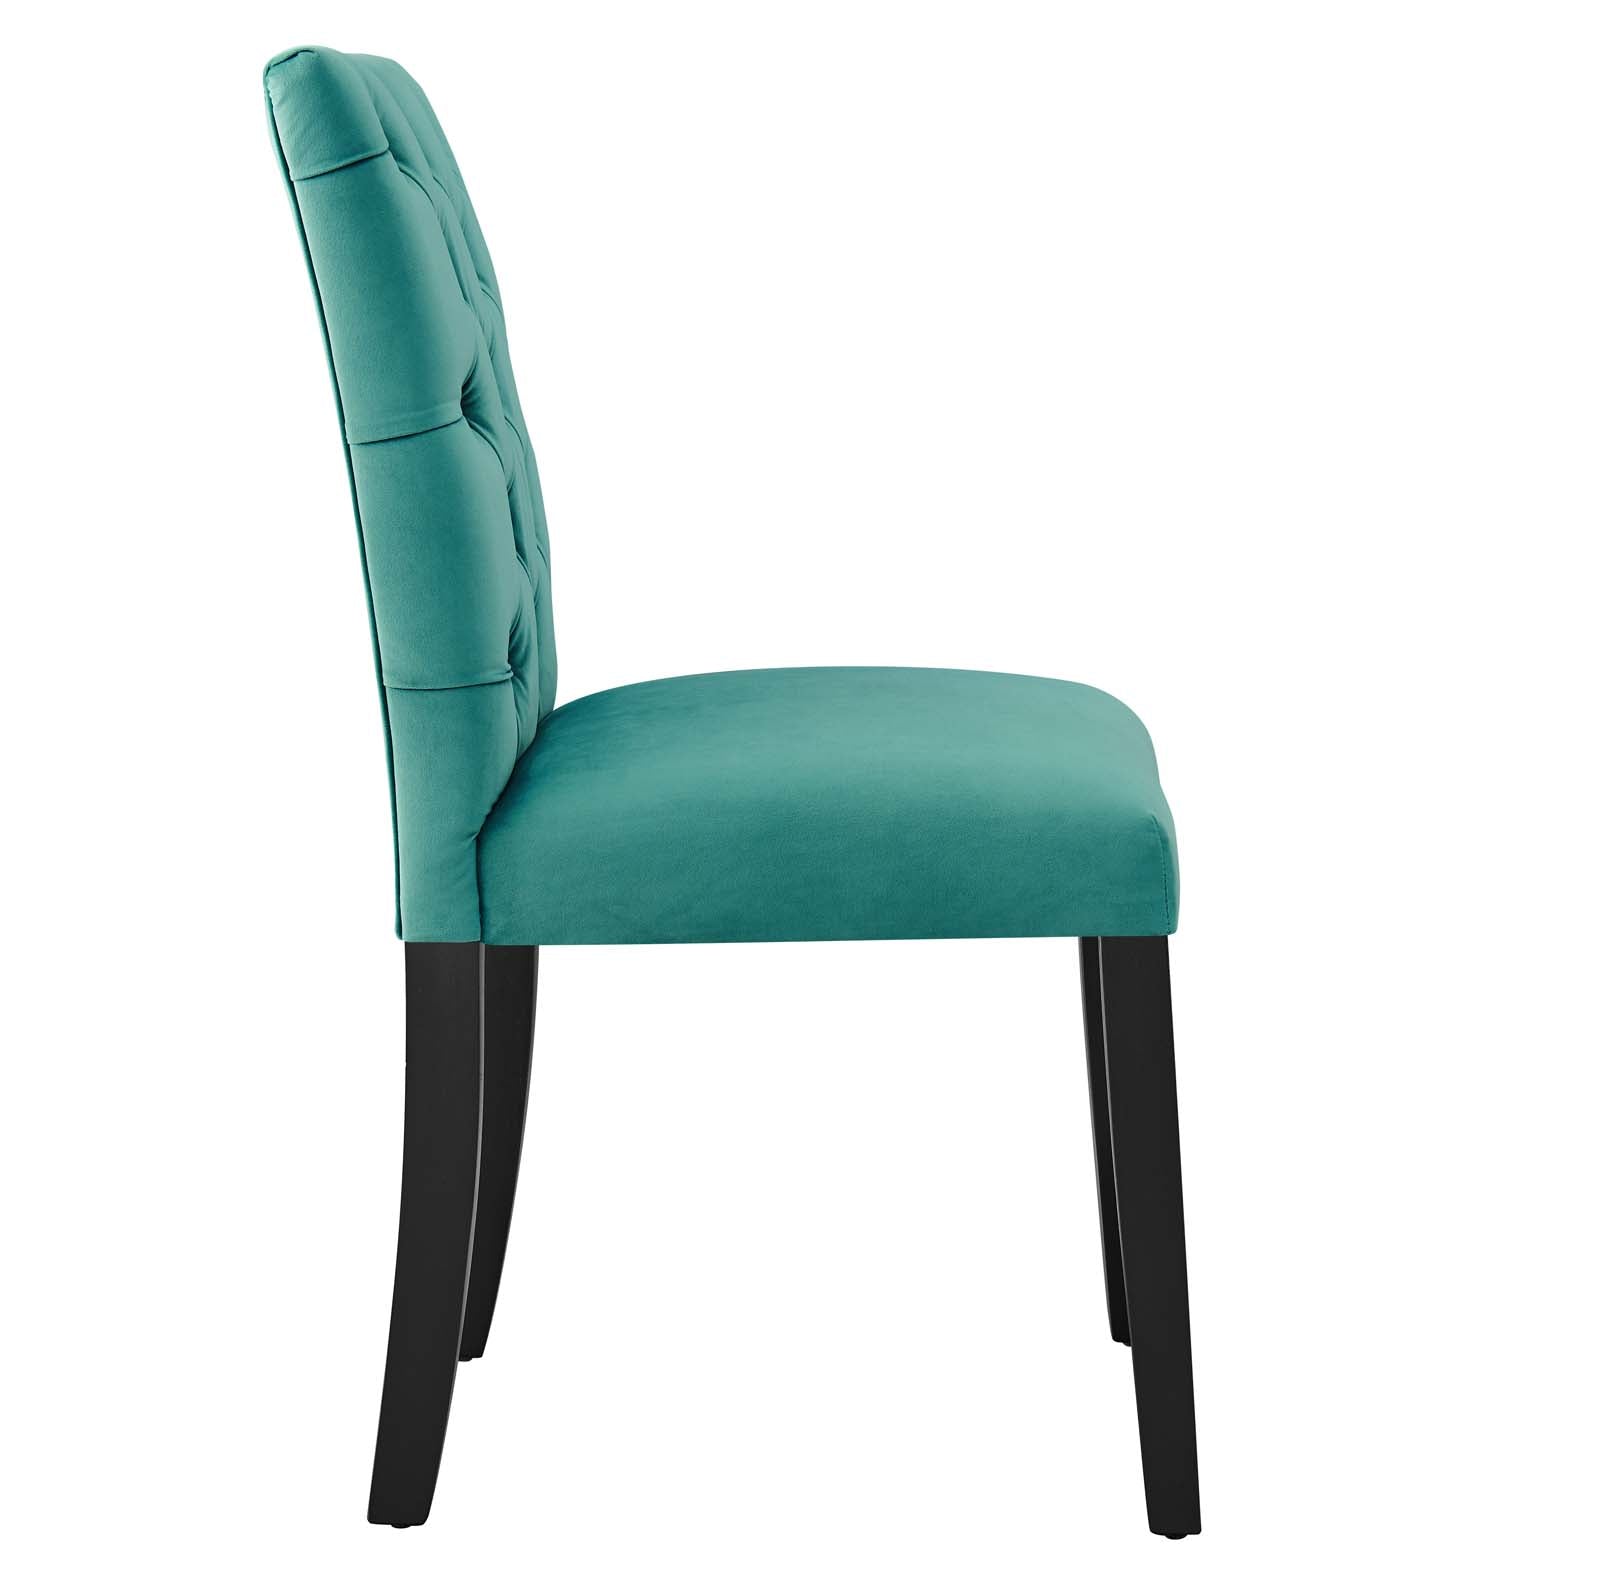 Modway Dining Chairs - Duchess Performance Velvet Dining Chairs - Set of 2 Teal